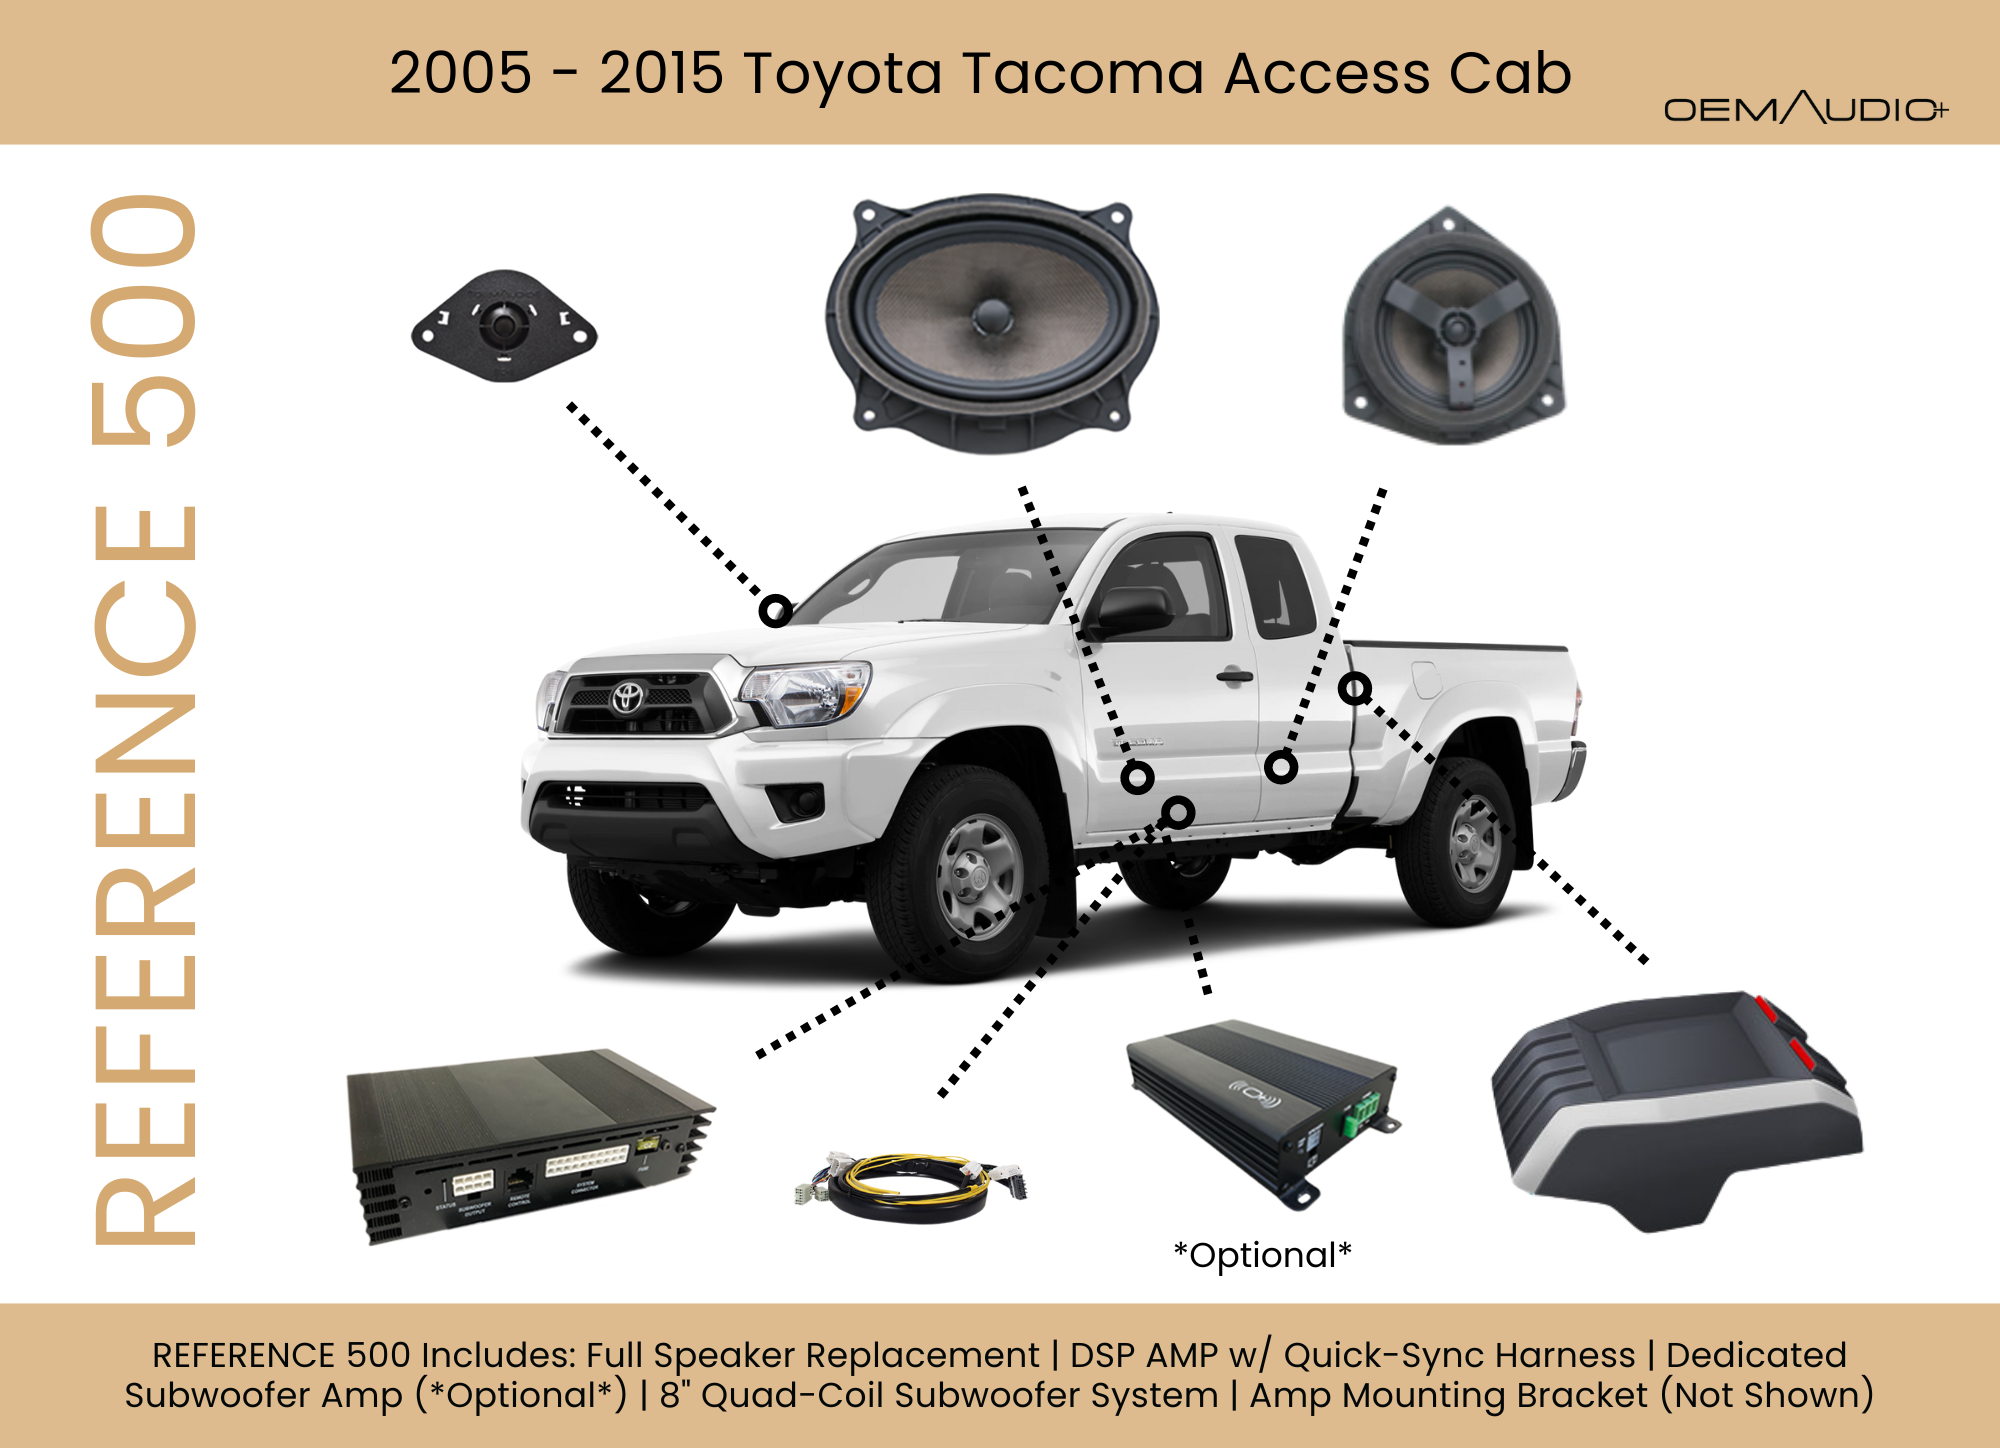 Toyota Tacoma (Access Cab) 2nd Gen | Reference 450Q